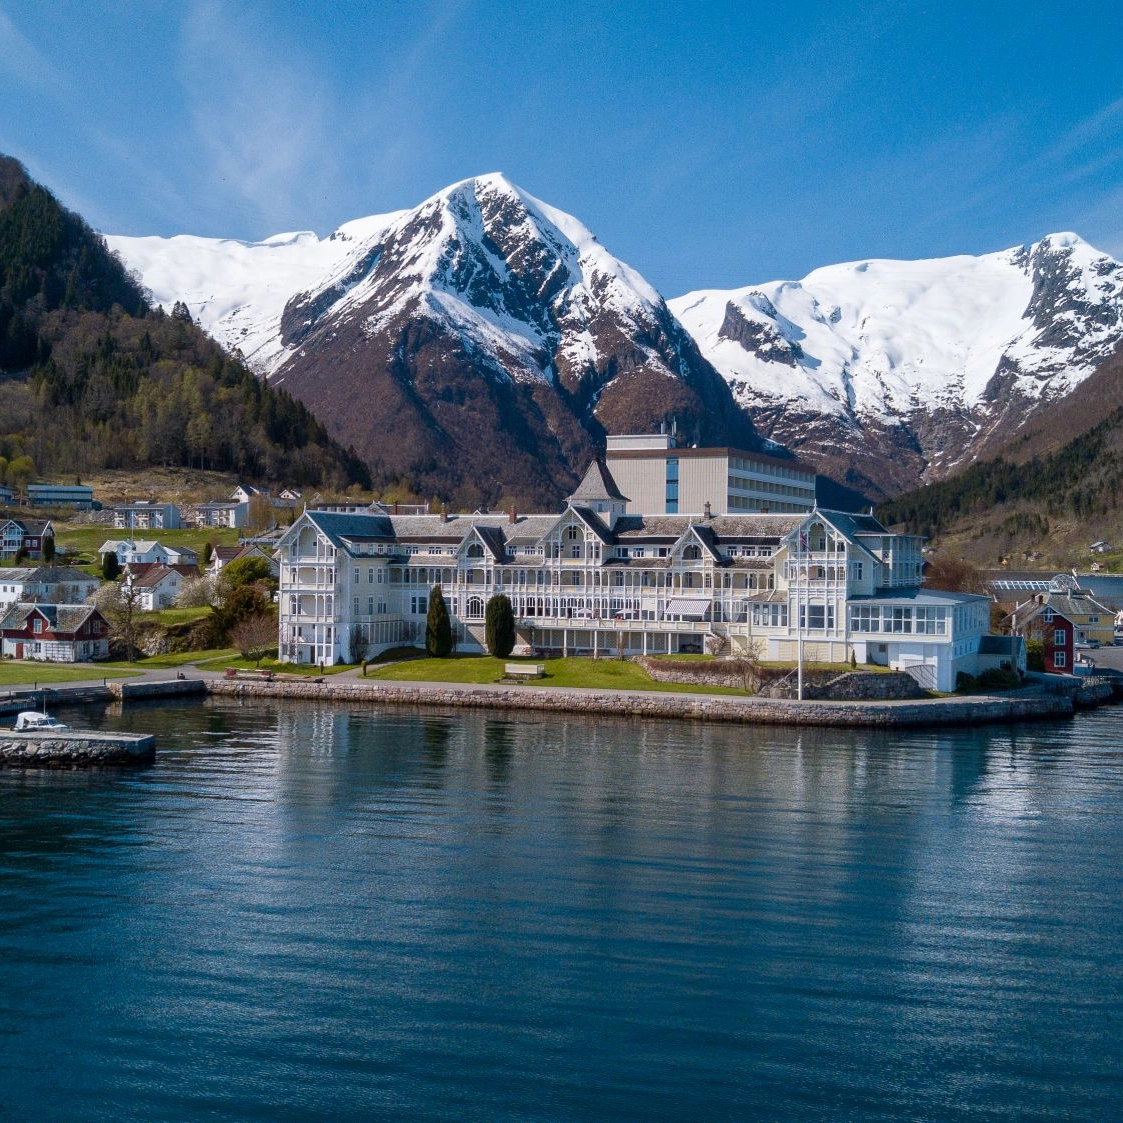 Balestrand - Sognefjord in a nutshell, Norway